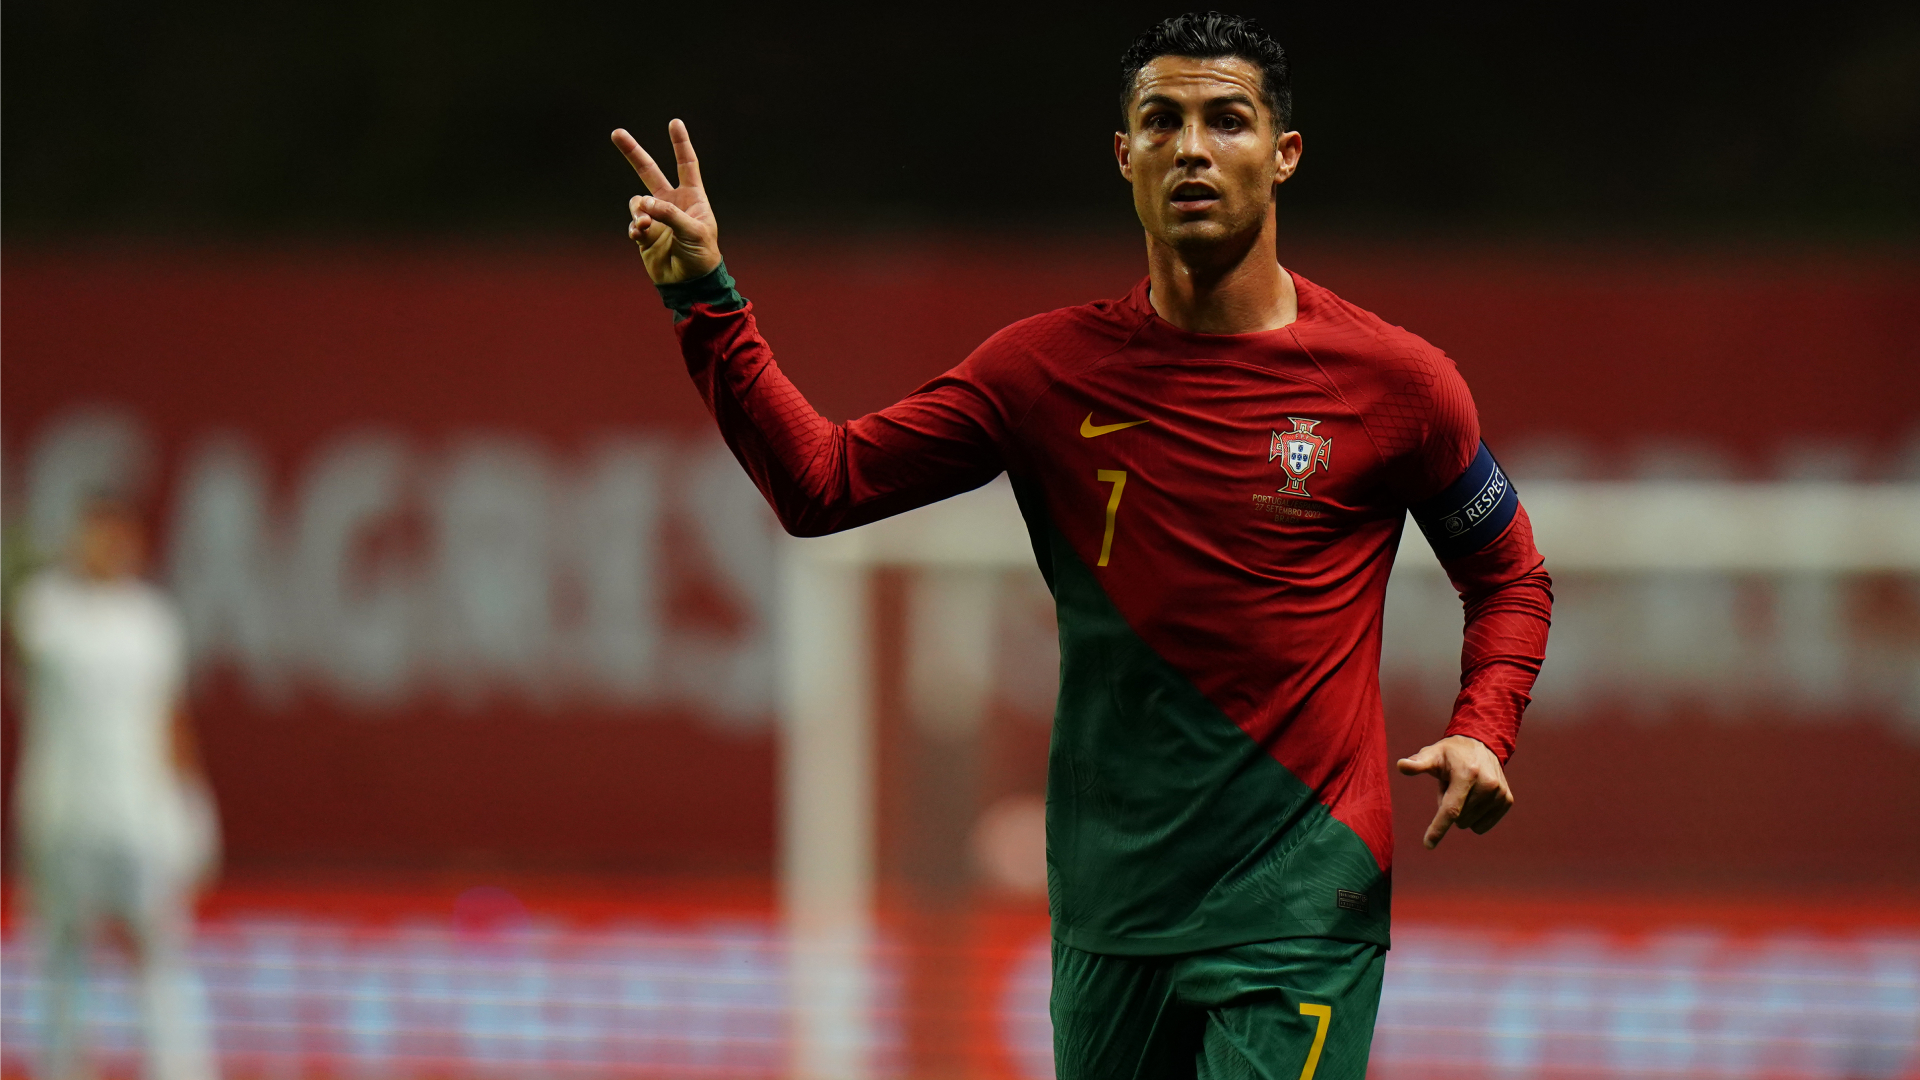 Ronaldo optimistic on Portugal's World Cup hopes, expects 'good tournament' in Qatar